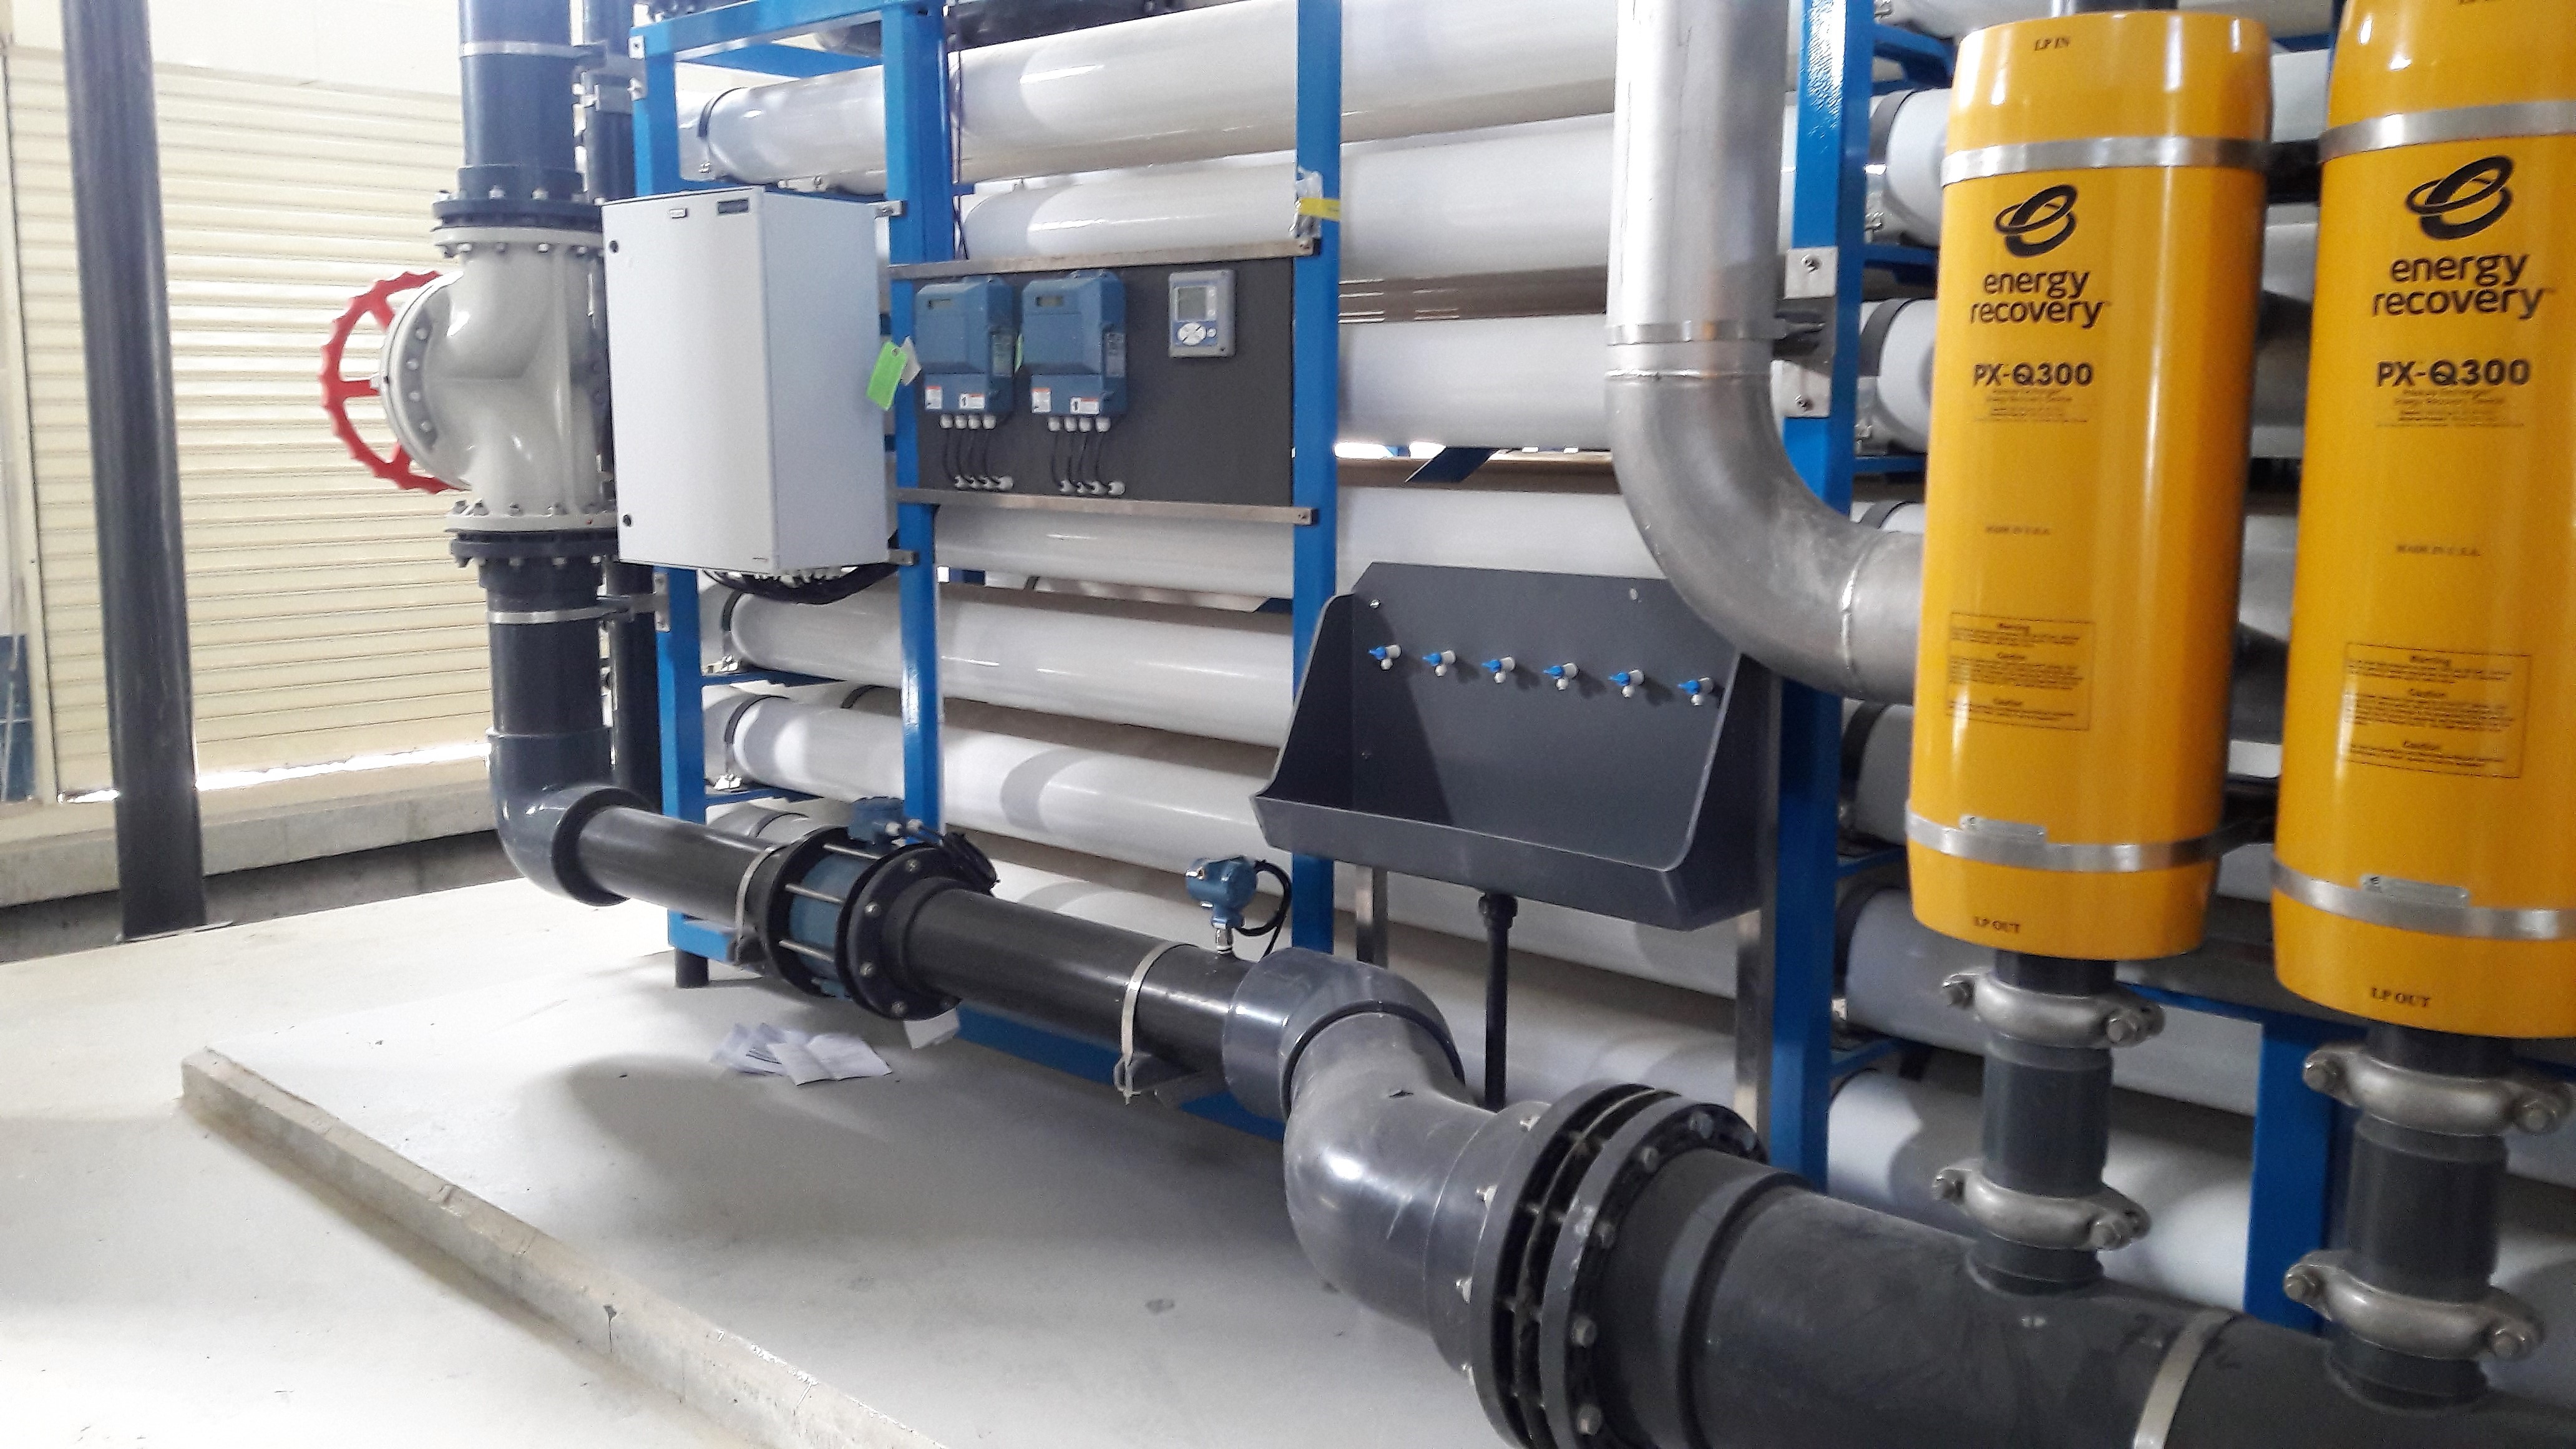 Desalination and Reverse Osmosis plants